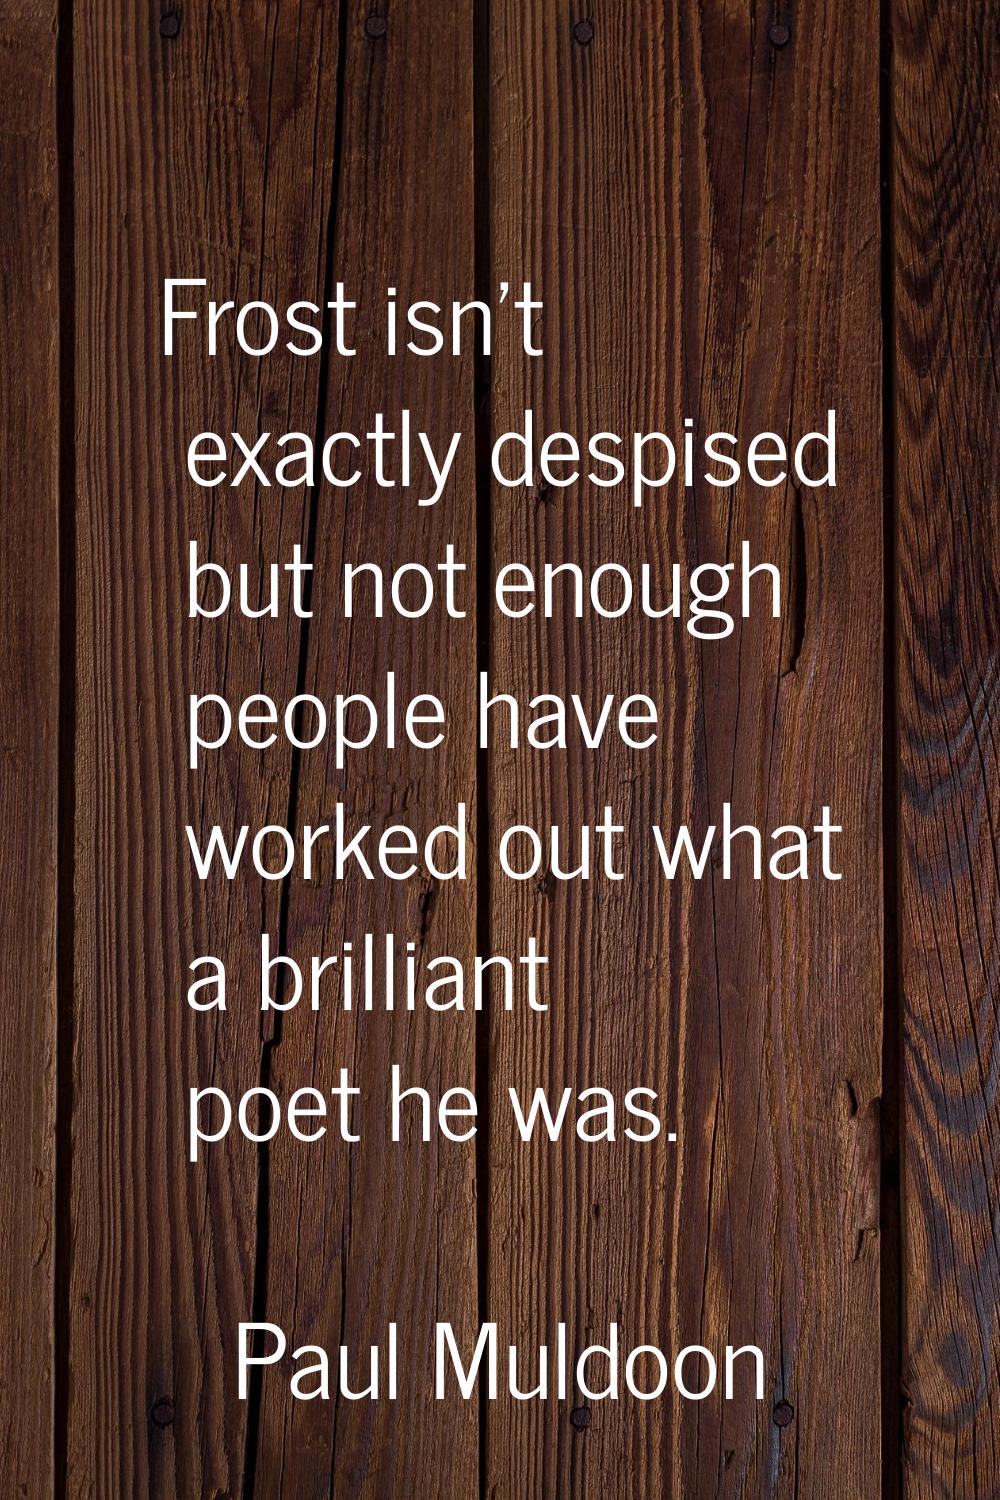 Frost isn't exactly despised but not enough people have worked out what a brilliant poet he was.